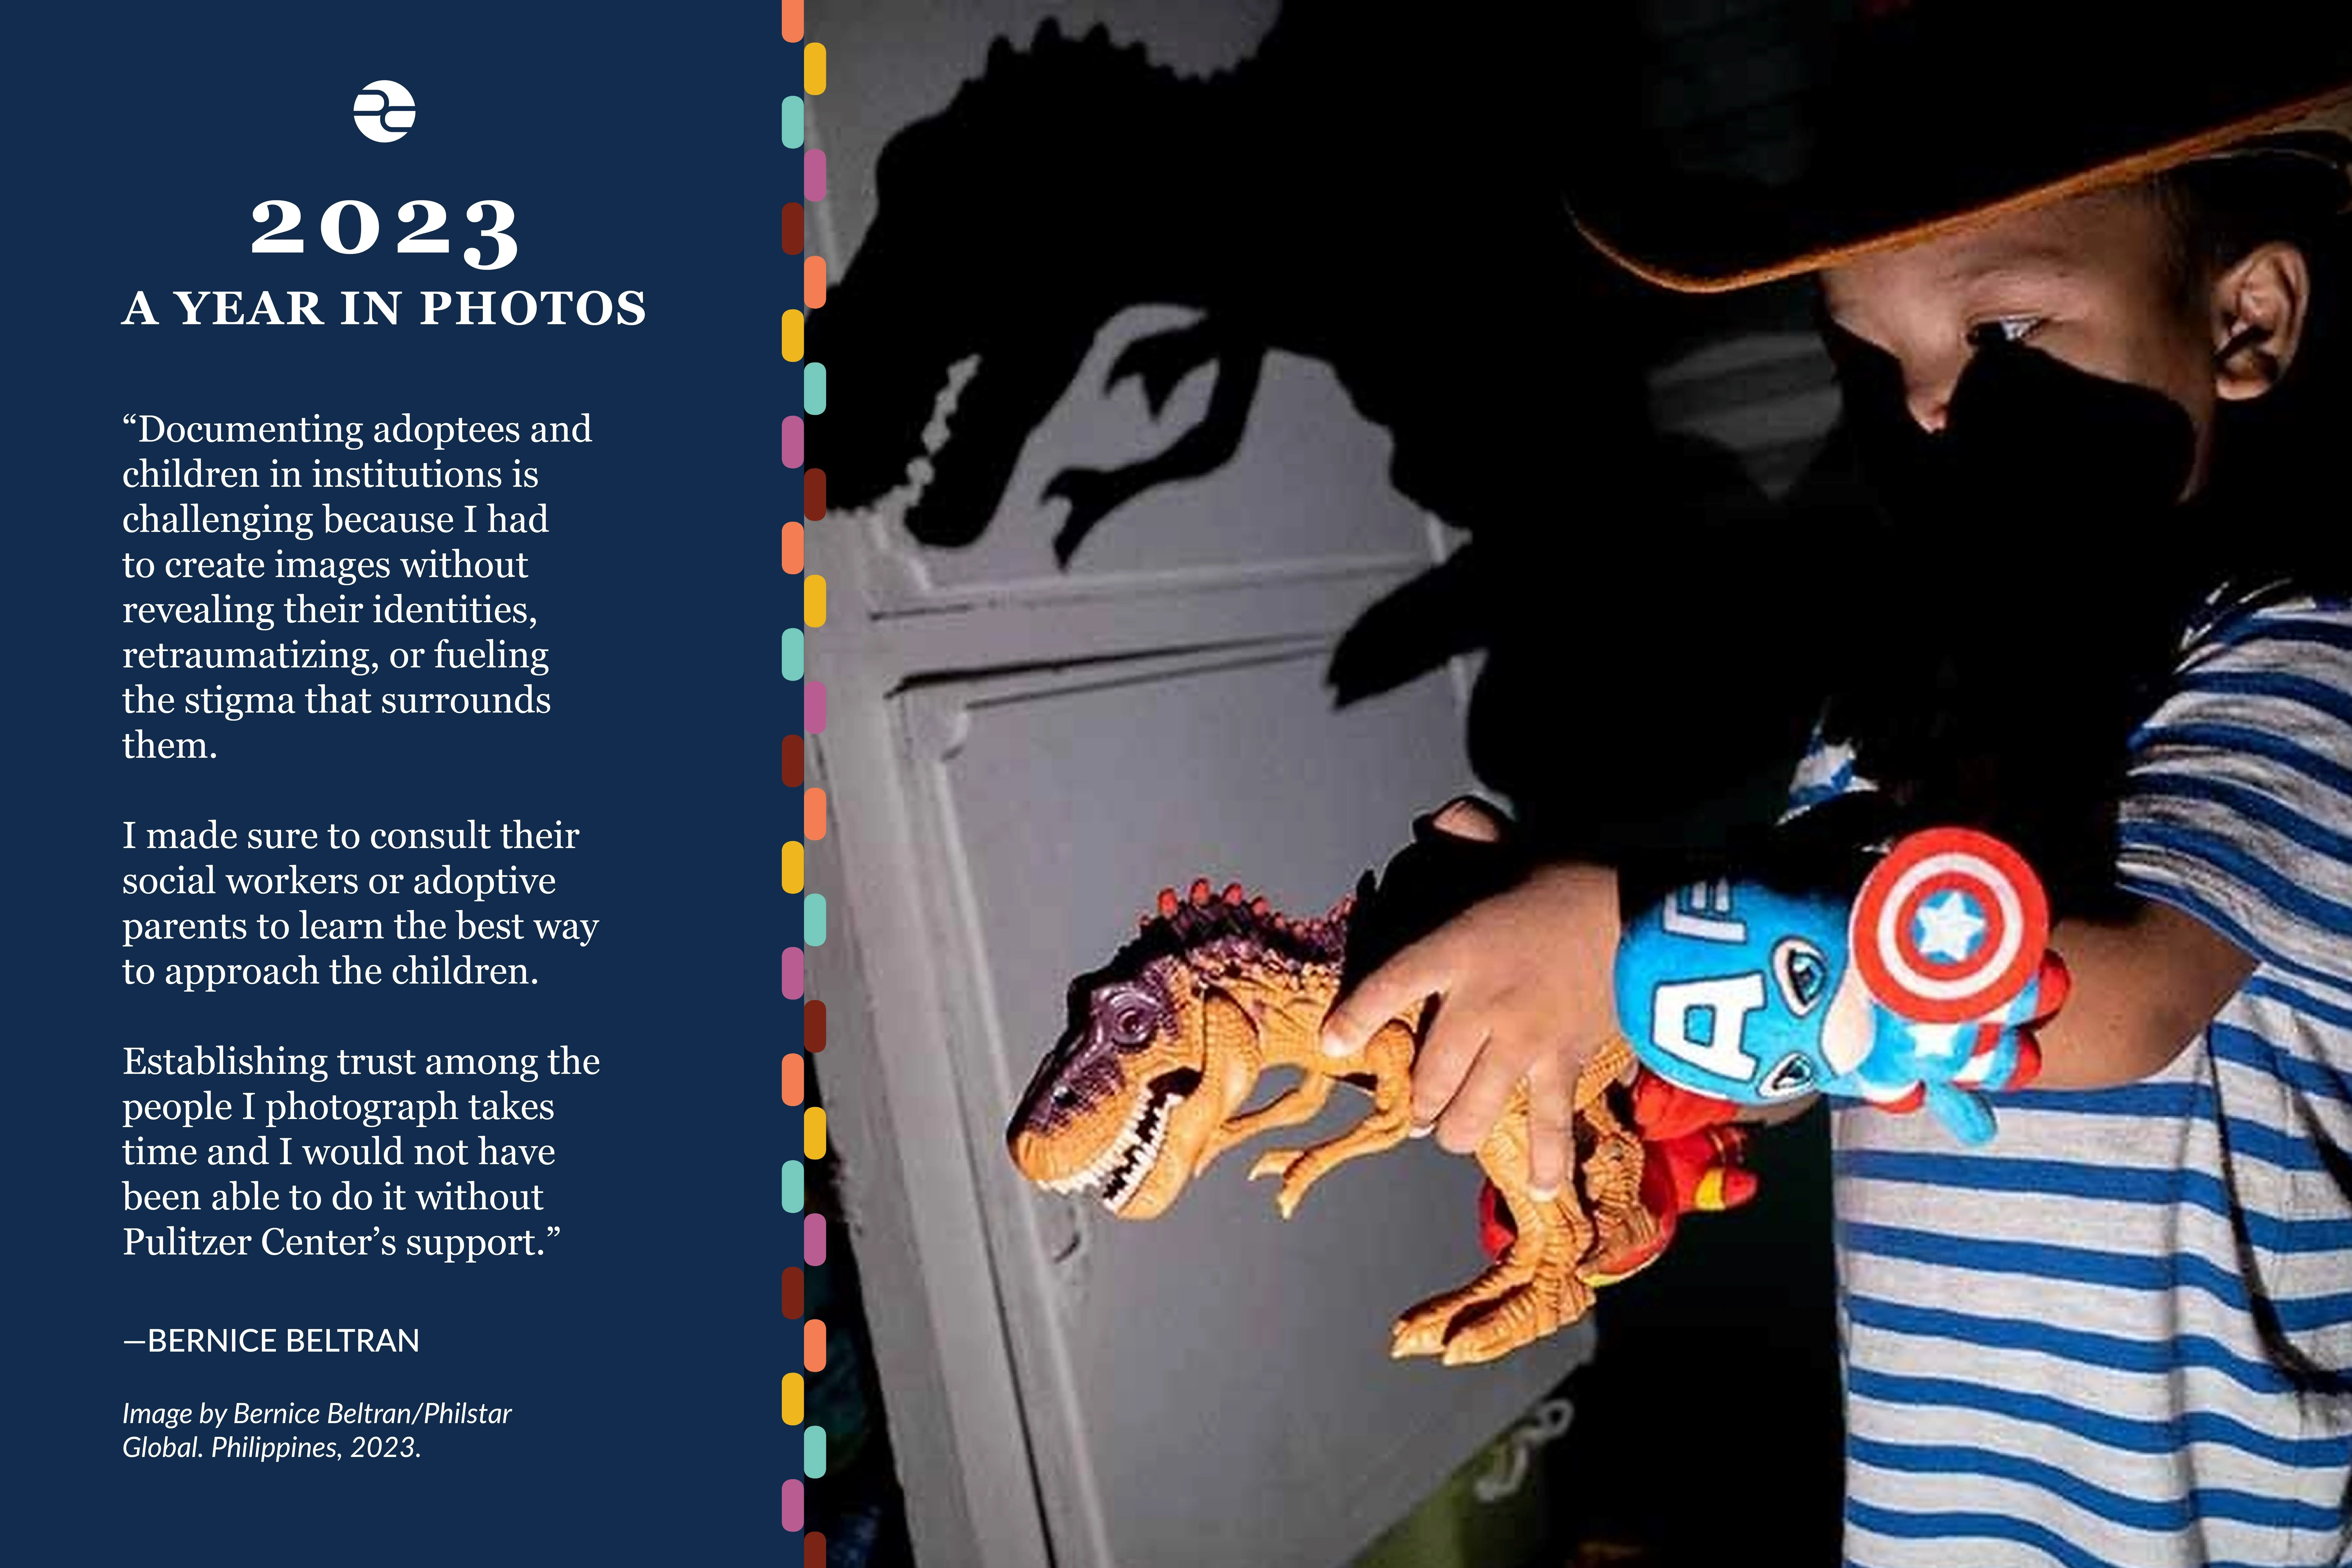 2023 Year in Photos graphic: photo of kid playing with toy, with artist statement by the photographer Bernice Beltran